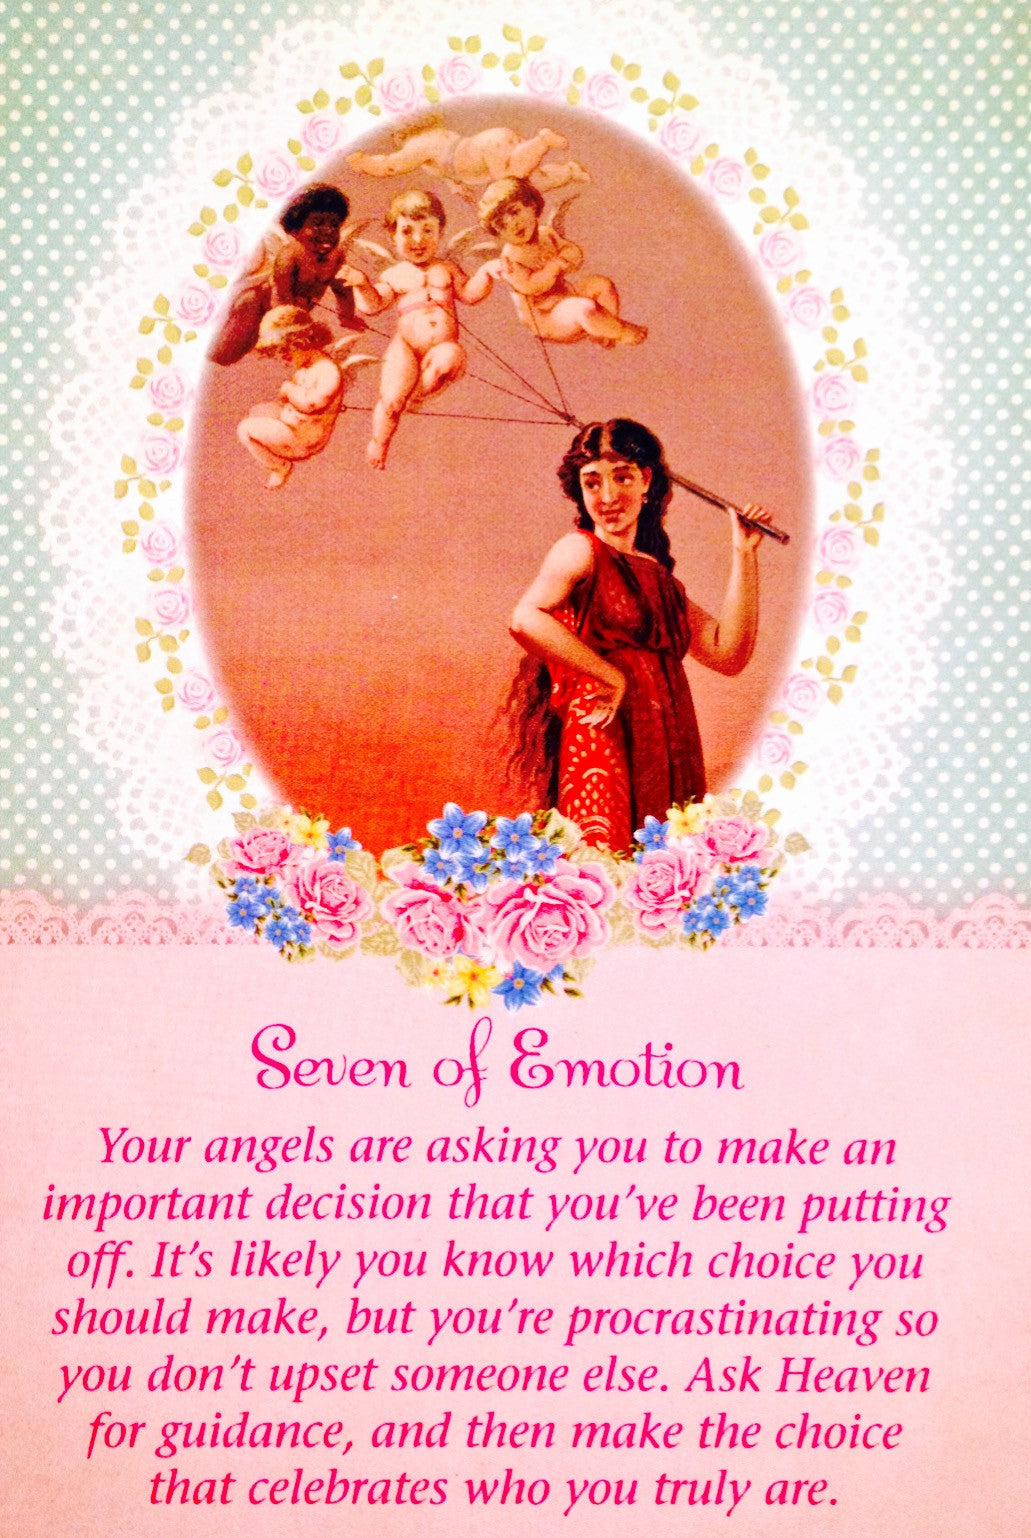 Seven Of Emotion: “Your angels are asking you to make an important decision that you have been putting off.